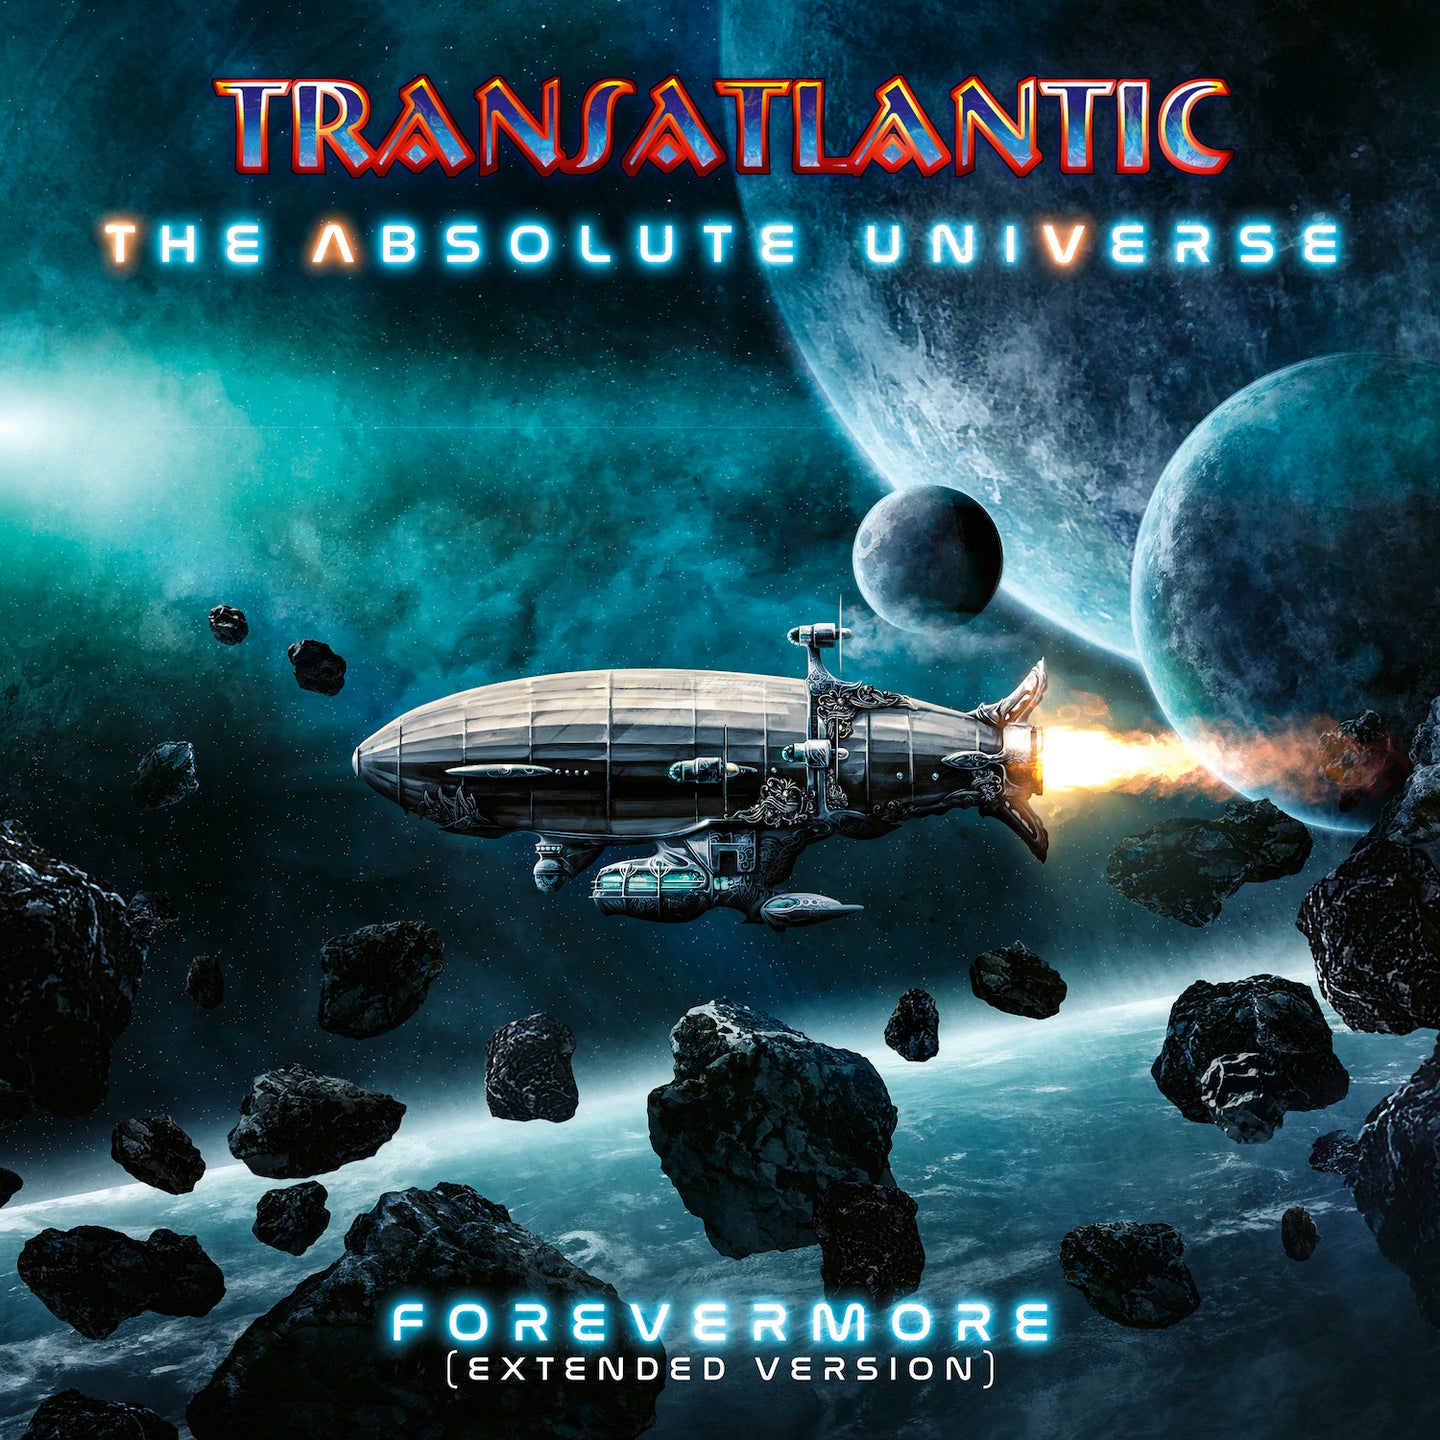 The Absolute Universe: Forevermore (Extended Version) (Special Edition 2Cd Digipak)